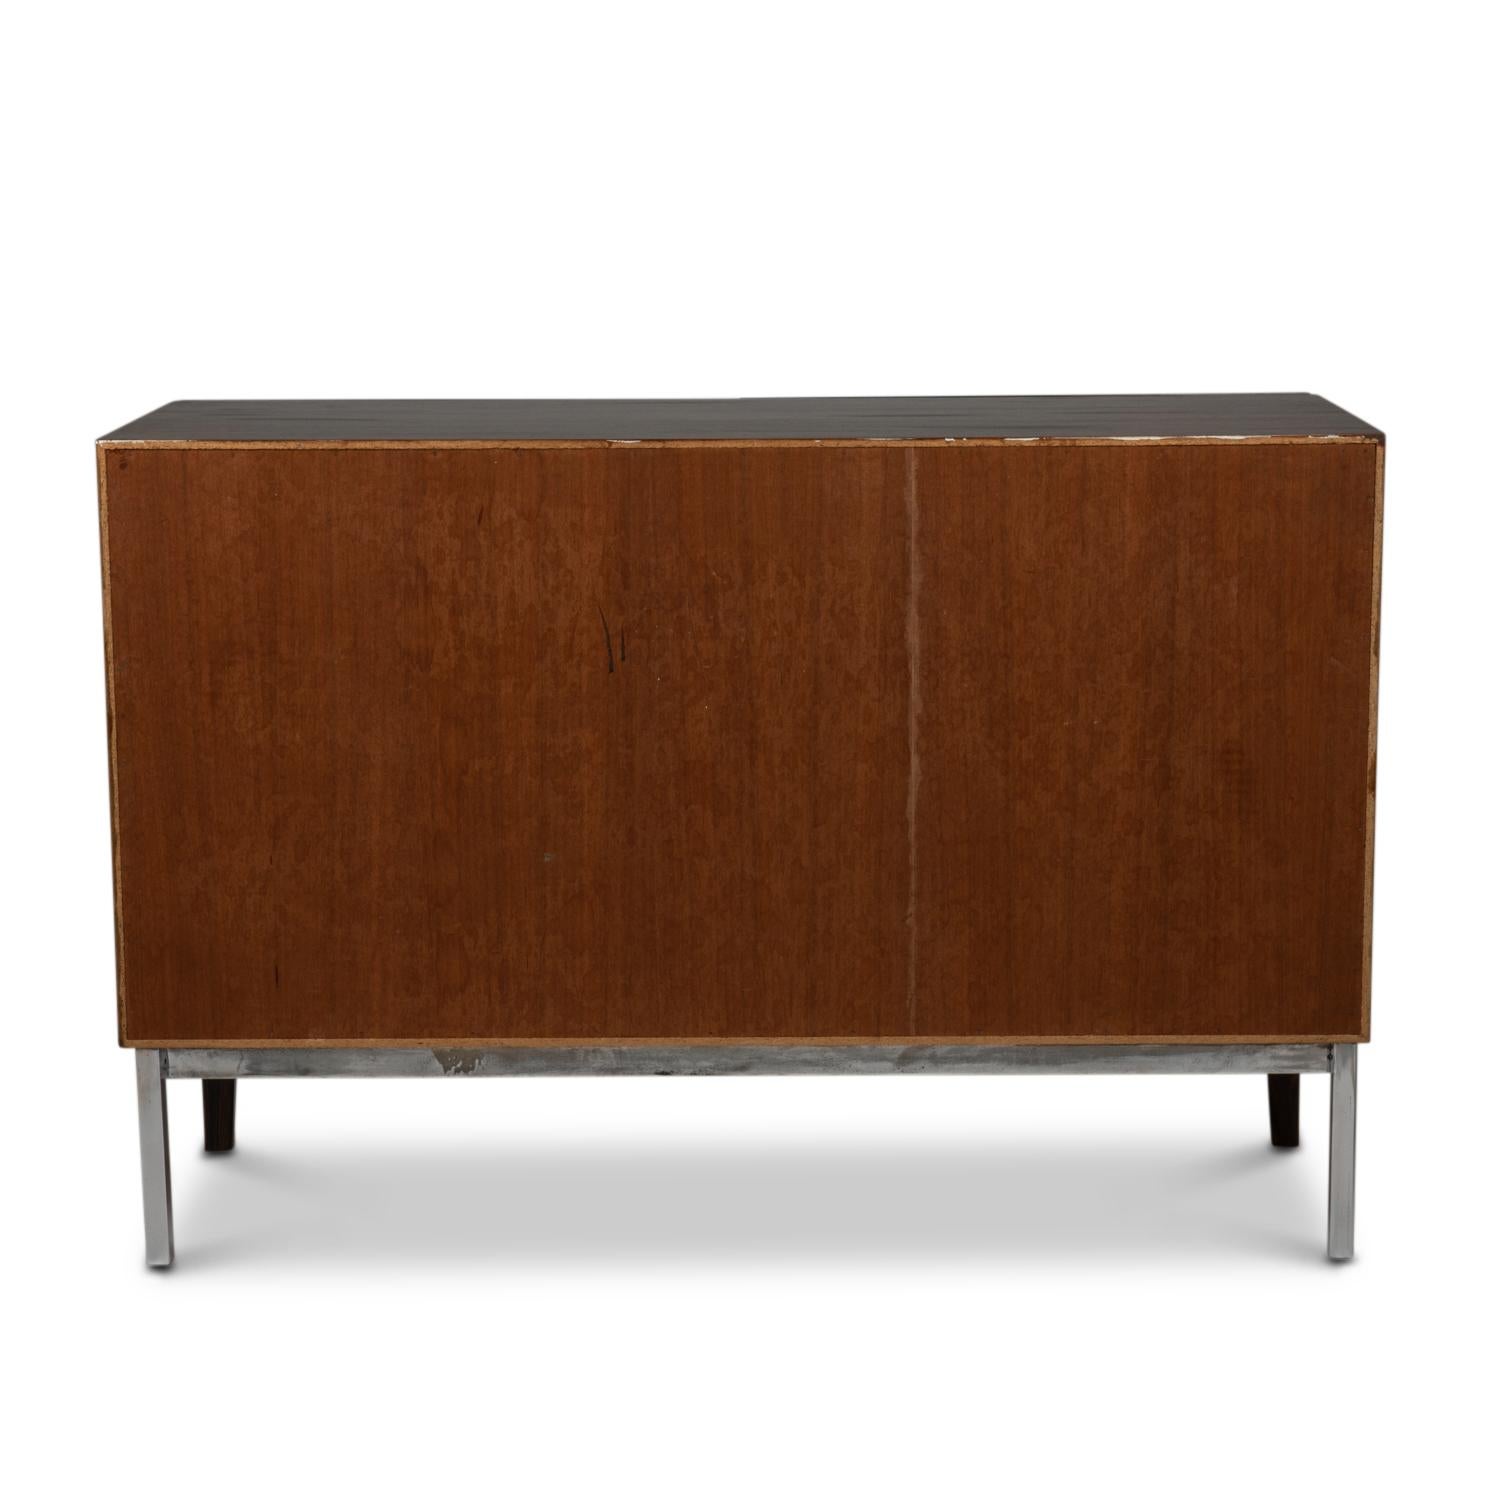 Low rectangular rosewood sideboard, opening with two doors on the front and four drawers inside with their chromed metal handles, two drawers and a shelf, the two drawers and the shelf interchangeable. Spacer bar in chromed metal. 
Dutch work made